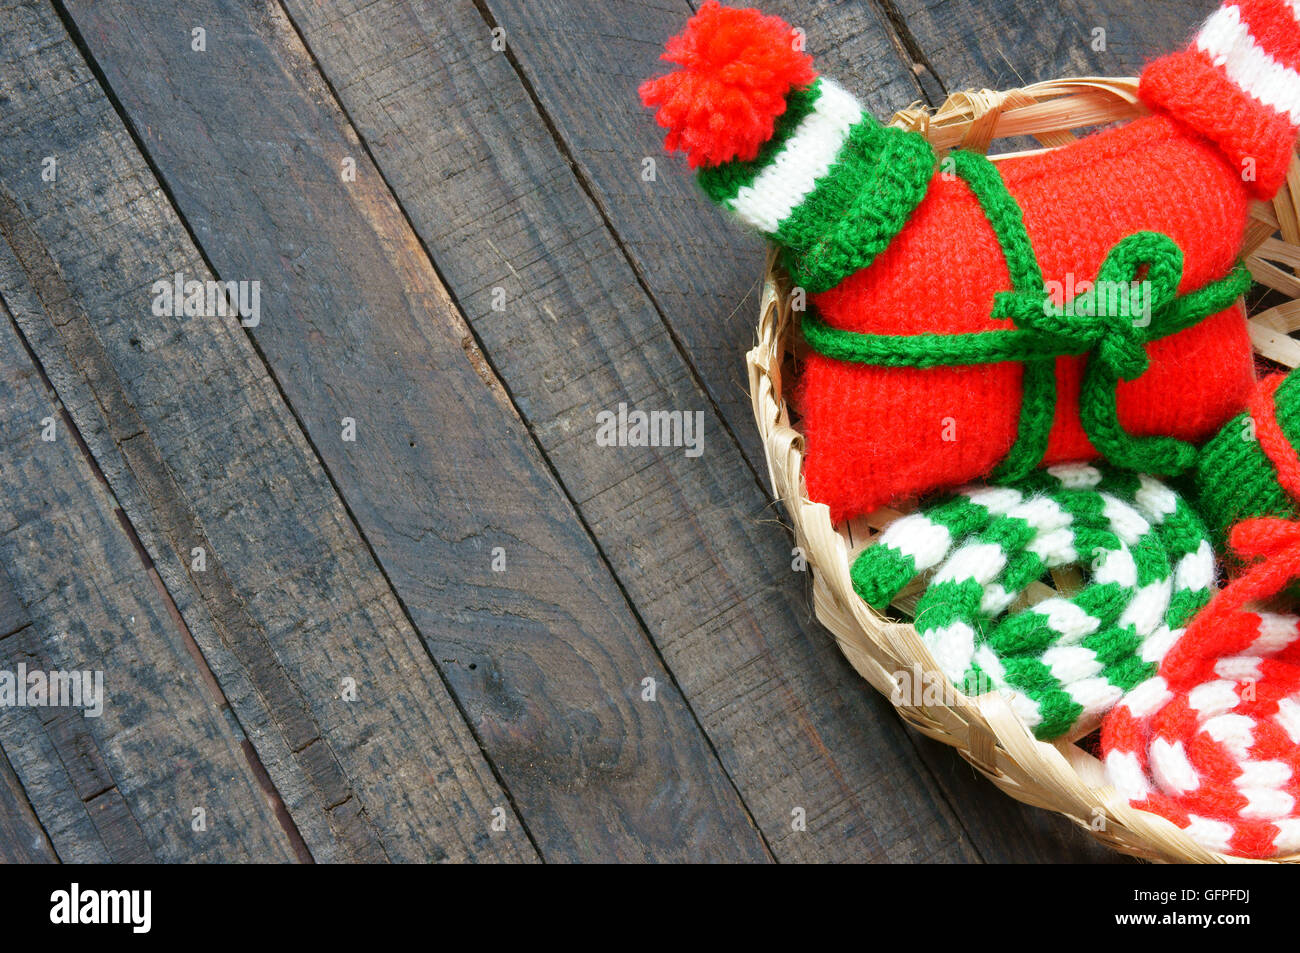 Christmas ornament for winter holiday, red and green knitted hat, scaft, sock, gift  in small size, symbol for xmas, noel season Stock Photo